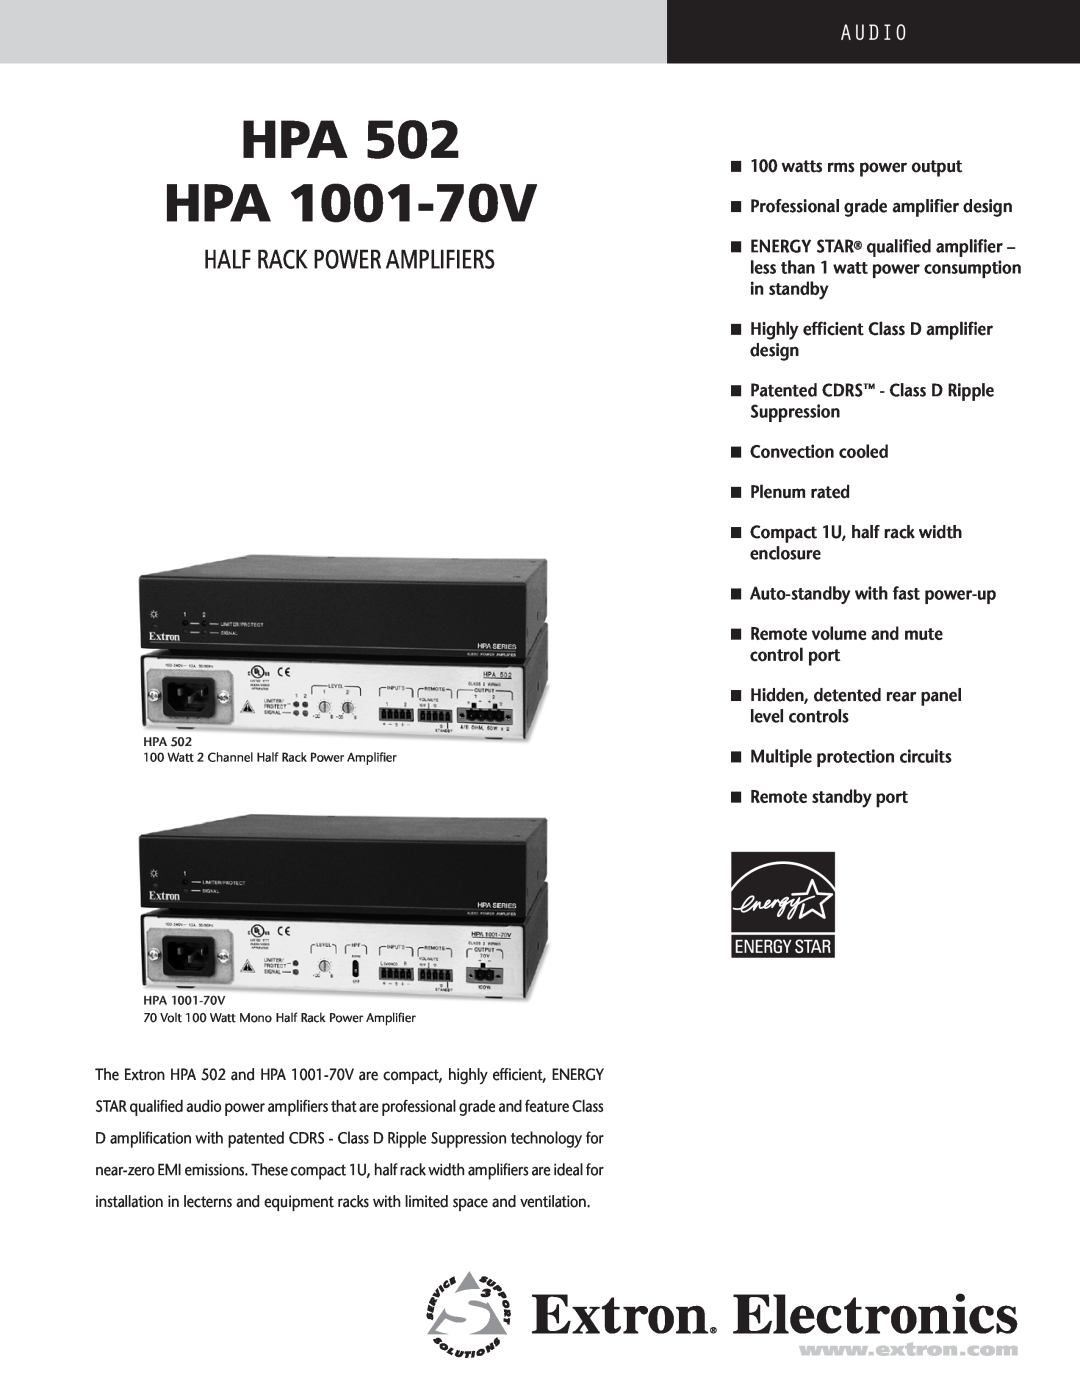 Extron electronic HPA 1001-70V, HPA 502 manual Half Rack Power Amplifiers, Hpa Hpa, audio 